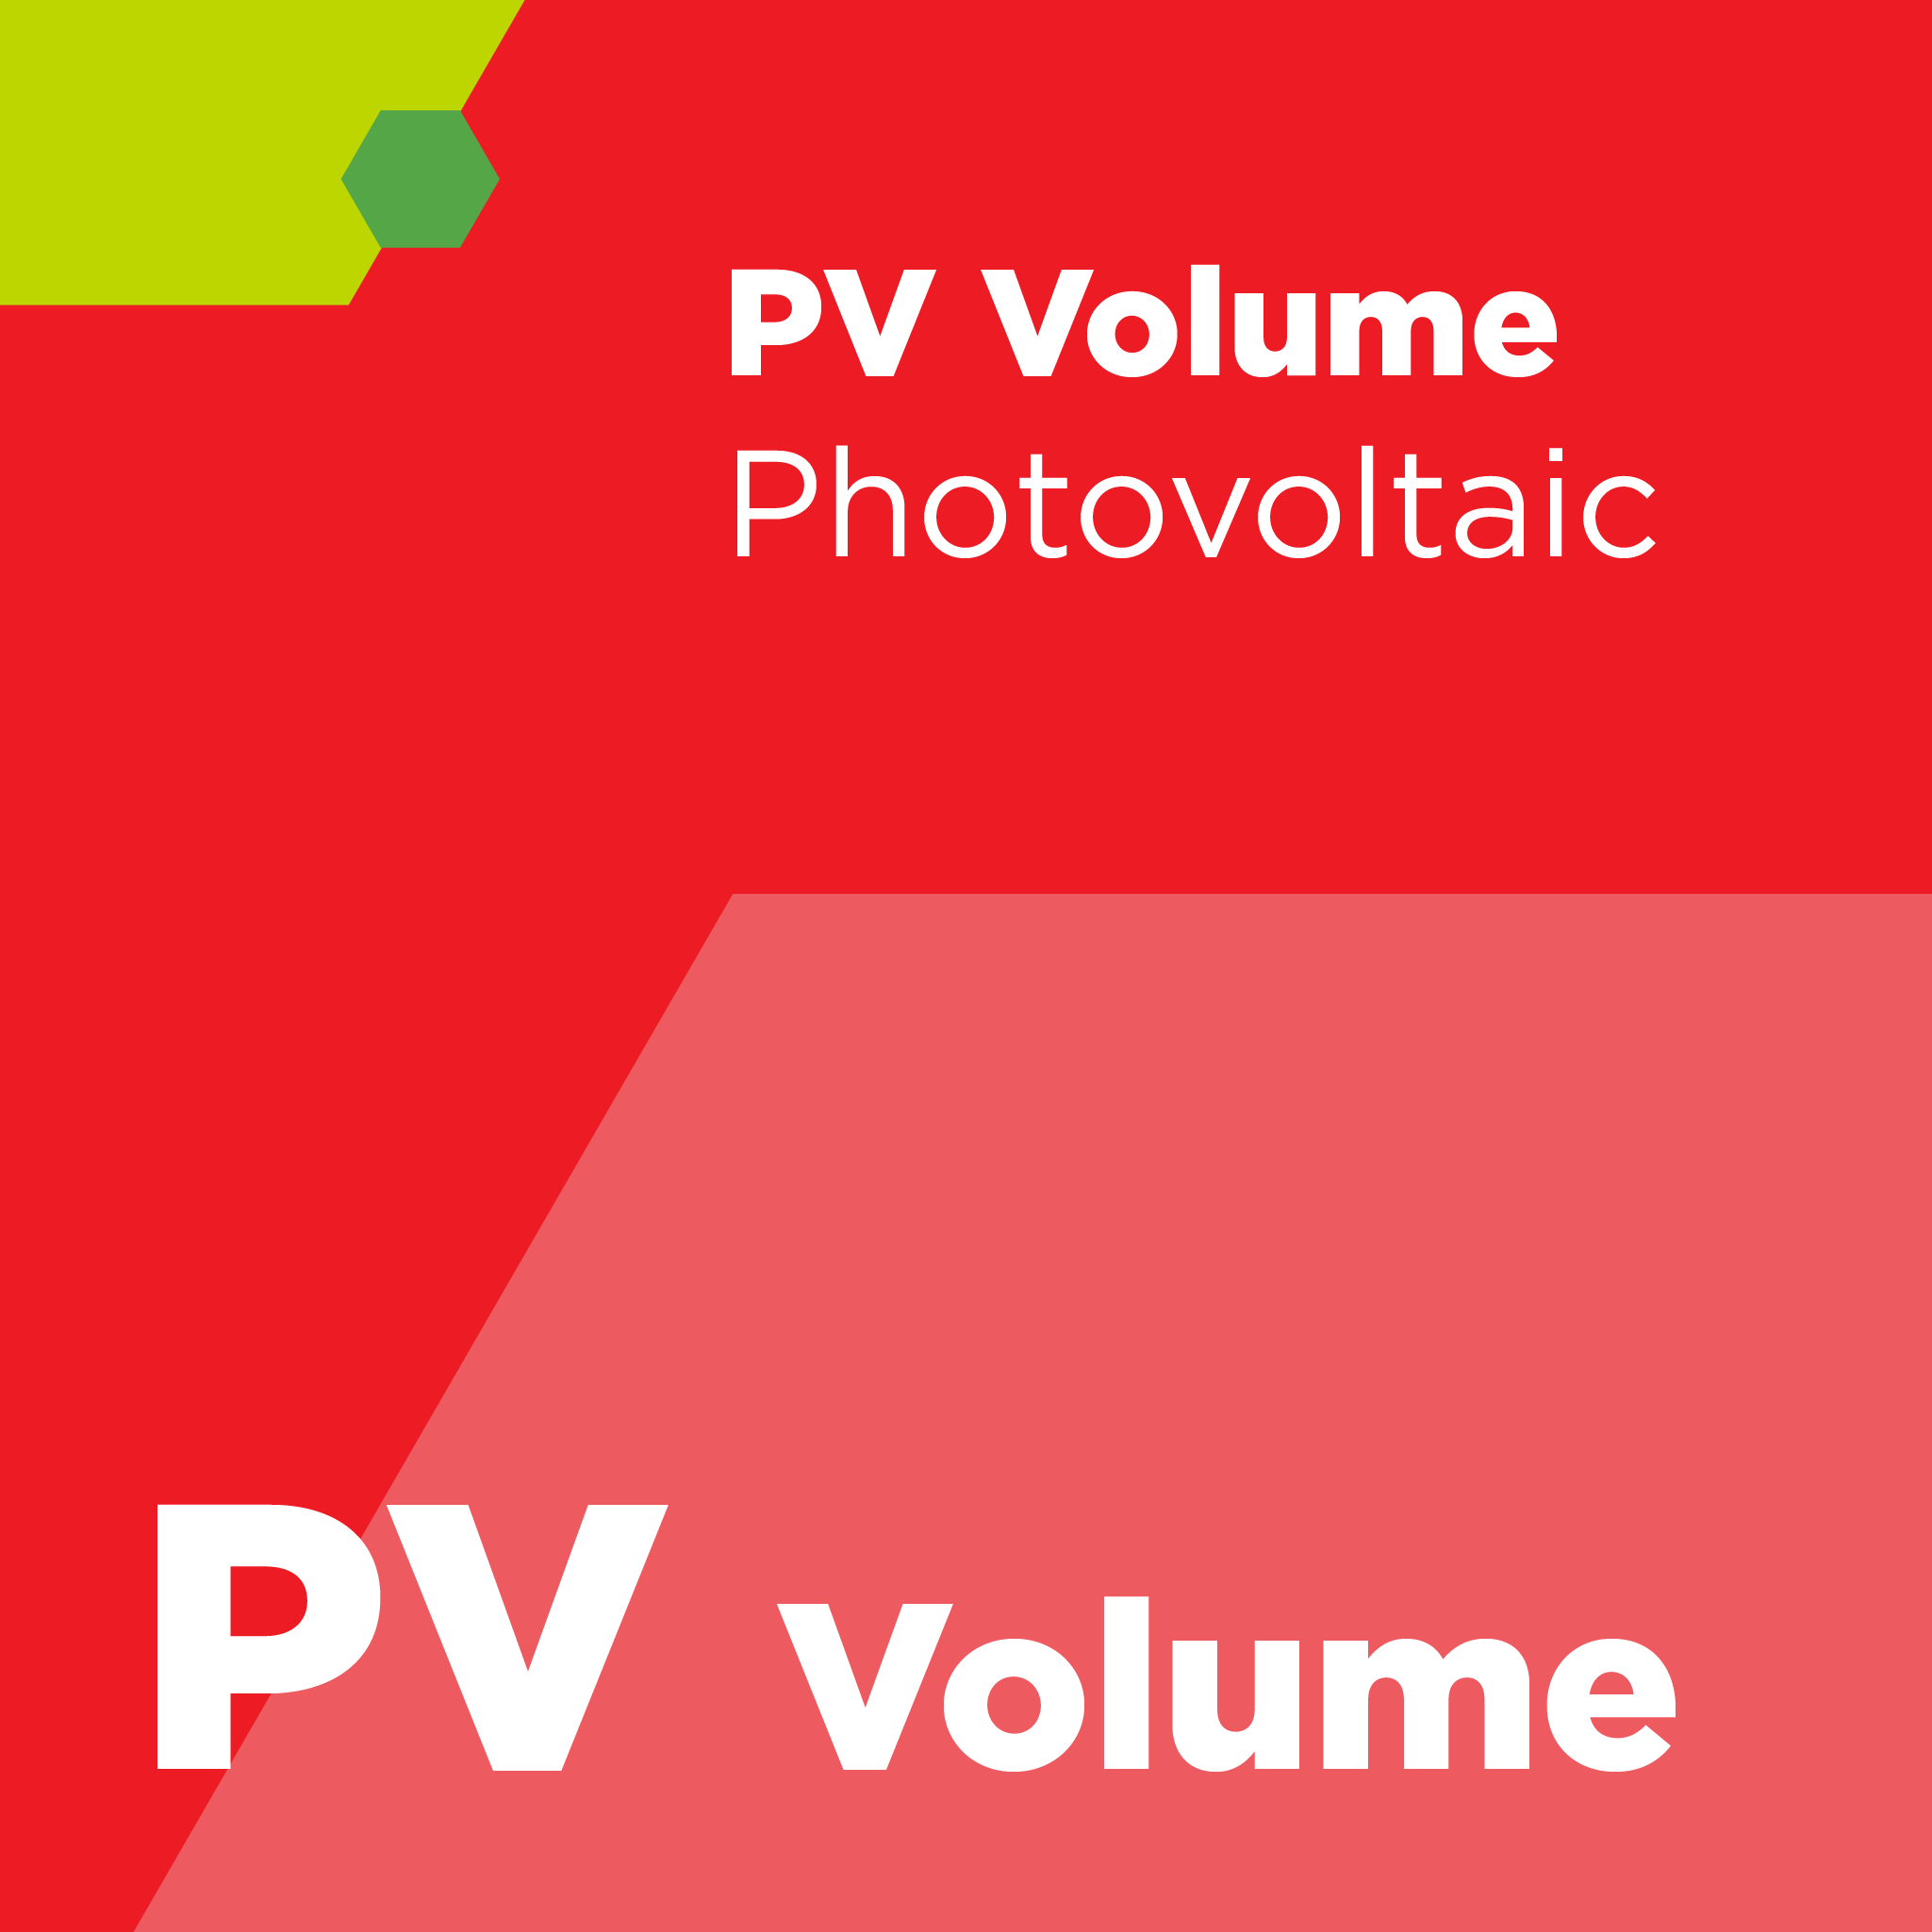 PV05700 - SEMI PV57 - Test Method For Current-Voltage (I-V) Performance Measurement of Organic Photovoltaic (OPV) and Dye-Sensitized Solar Cell (DSSC) and Perovskite Solar Cell (PSC)